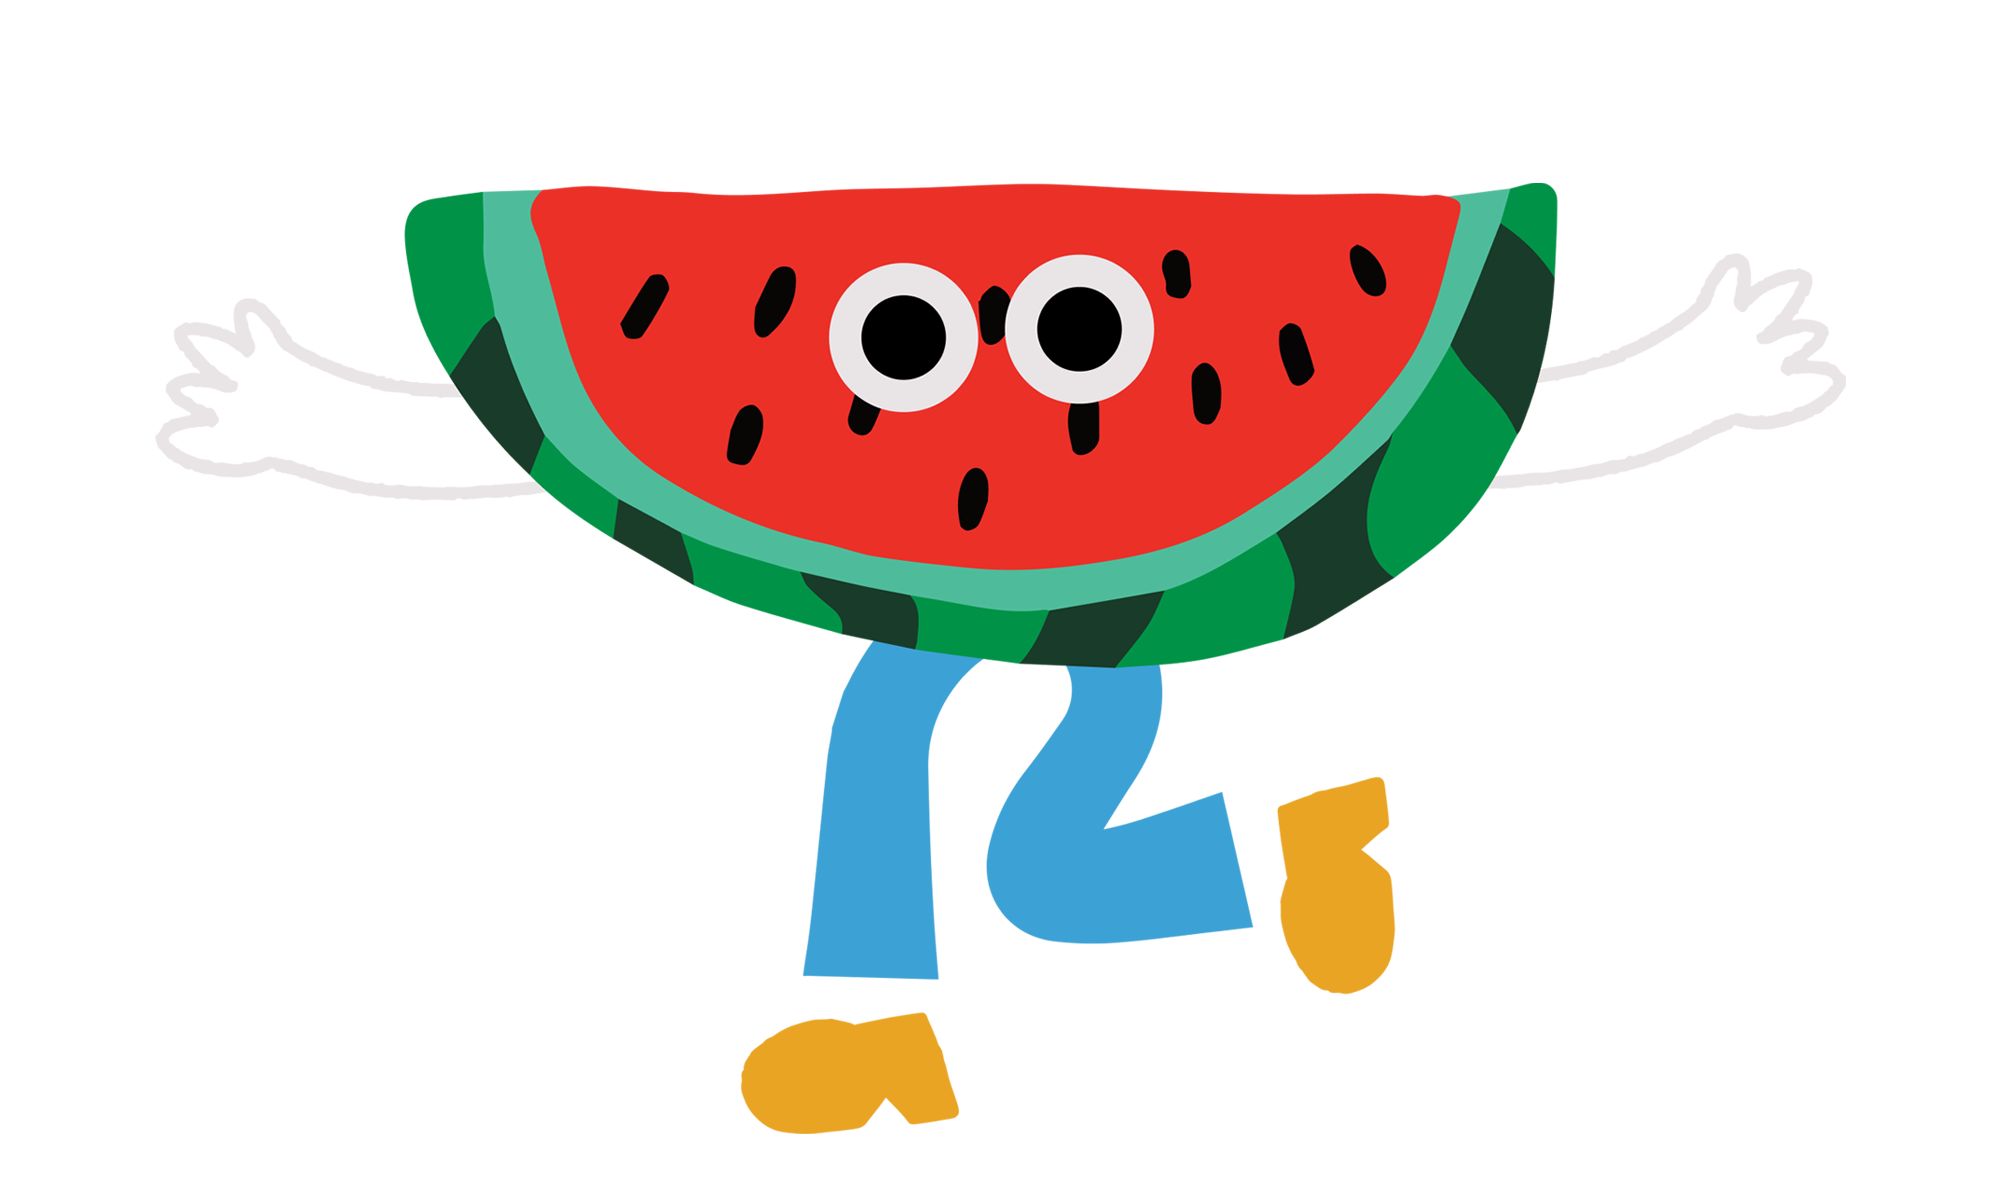 Fun watermelon character graphic. The watermelon character has a surprised look on their face, arms stretched outwards, and looks to be dancing. The watermelon graphic is wearing pants and shoes.